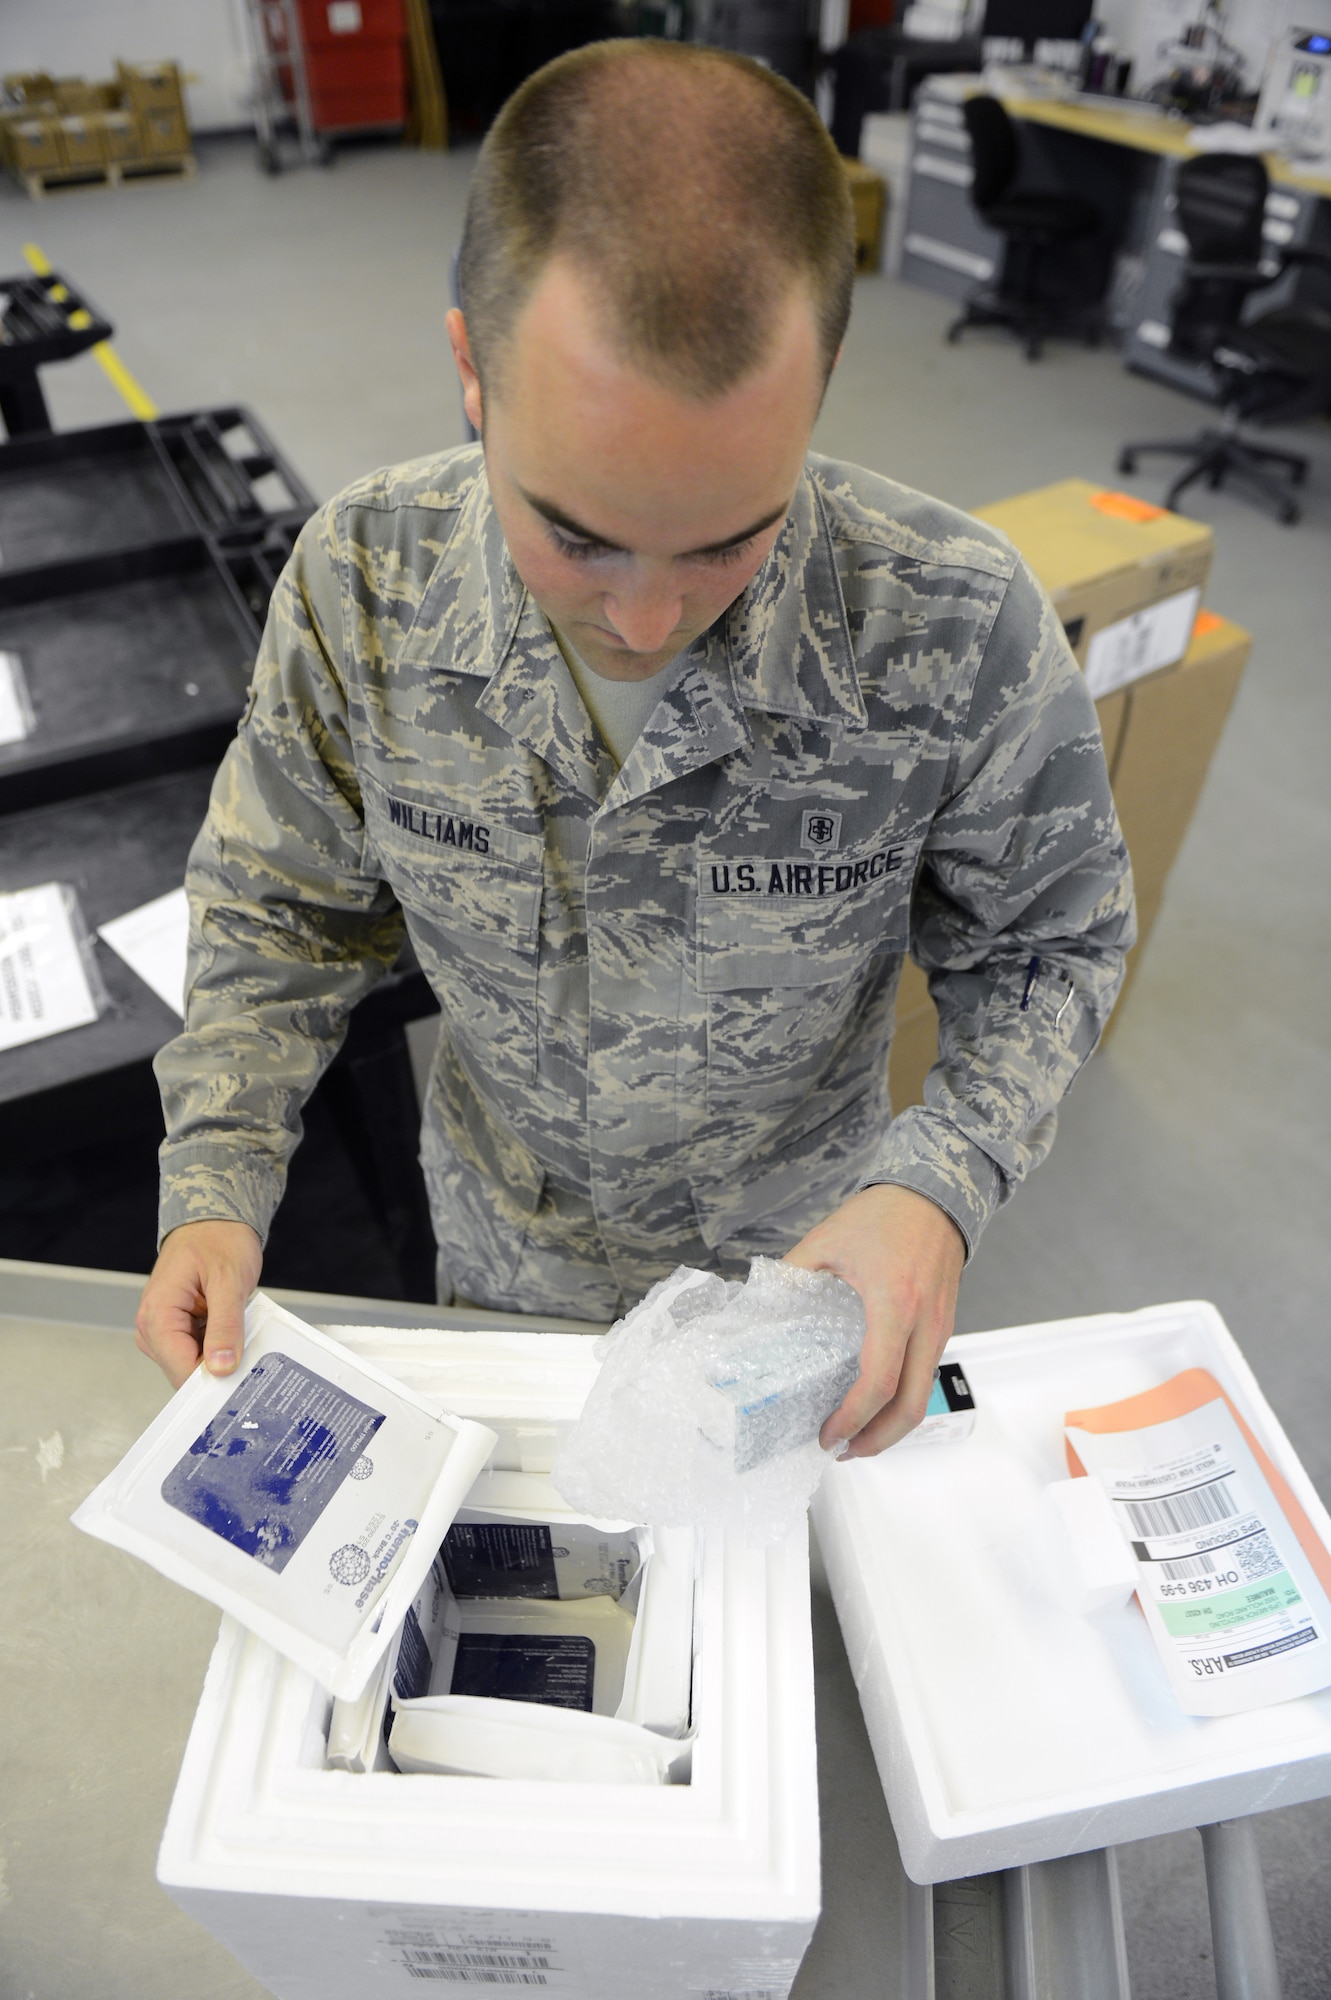 Airman 1st Class Jordan Williams, 2nd Medical Support Squadron Medical Logistics, removes medical supplies from a box on Barksdale Air Force Base, La., May 21, 2013.The Medical Logistics shop handles everything from office supplies and first aid kits to pharmaceuticals and dental chairs for the medical clinic. (U.S. Air Force photo/Senior Airman Micaiah Anthony)